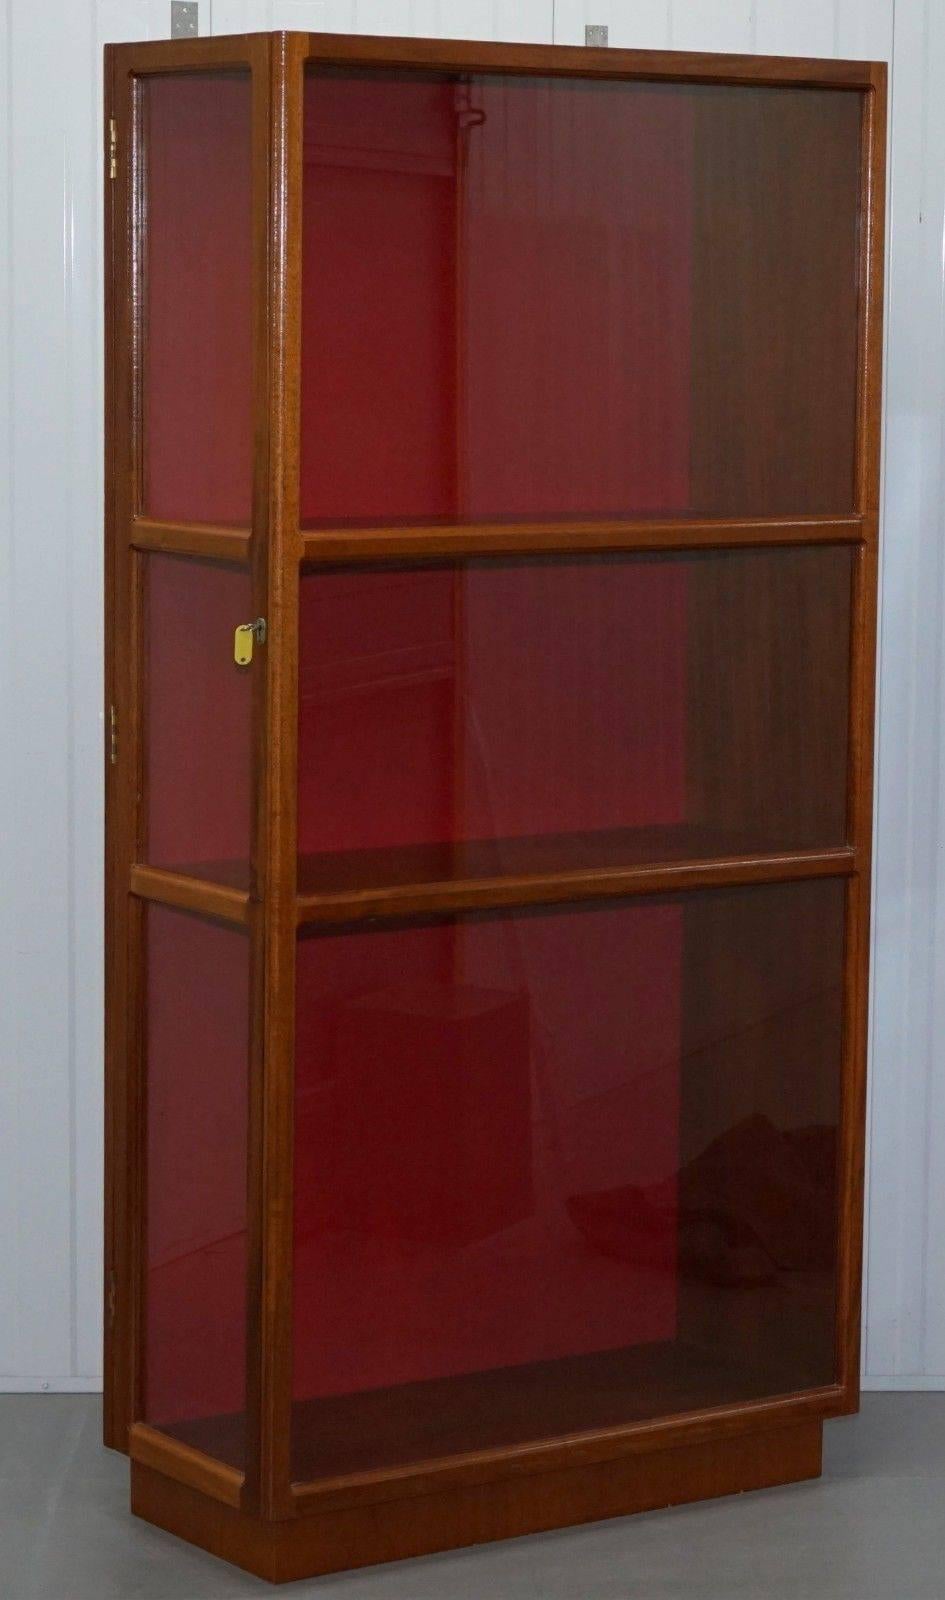 We are delighted to offer for sale this lovely mid-century light mahogany glazed display cabinet with side locking door

A very good looking well-made piece in lightly restored condition, we have deep cleaned hand condition waxed and hand polished